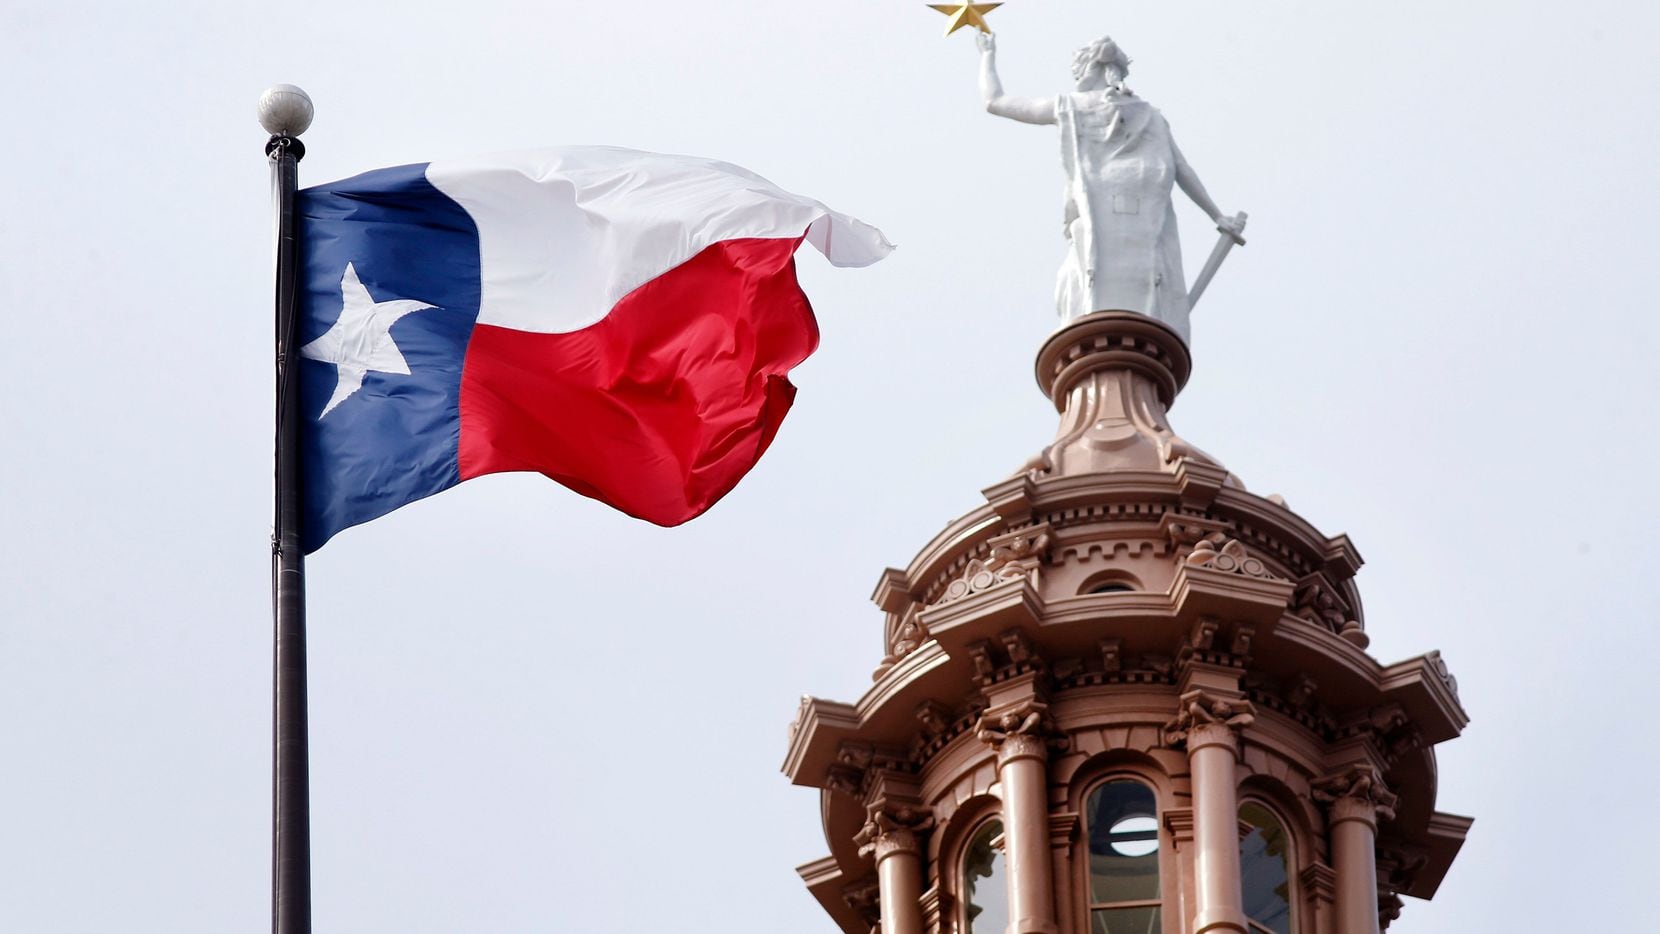 The Texas flag flies over the Texas Capitol in Austin, Texas, May 22, 2019.